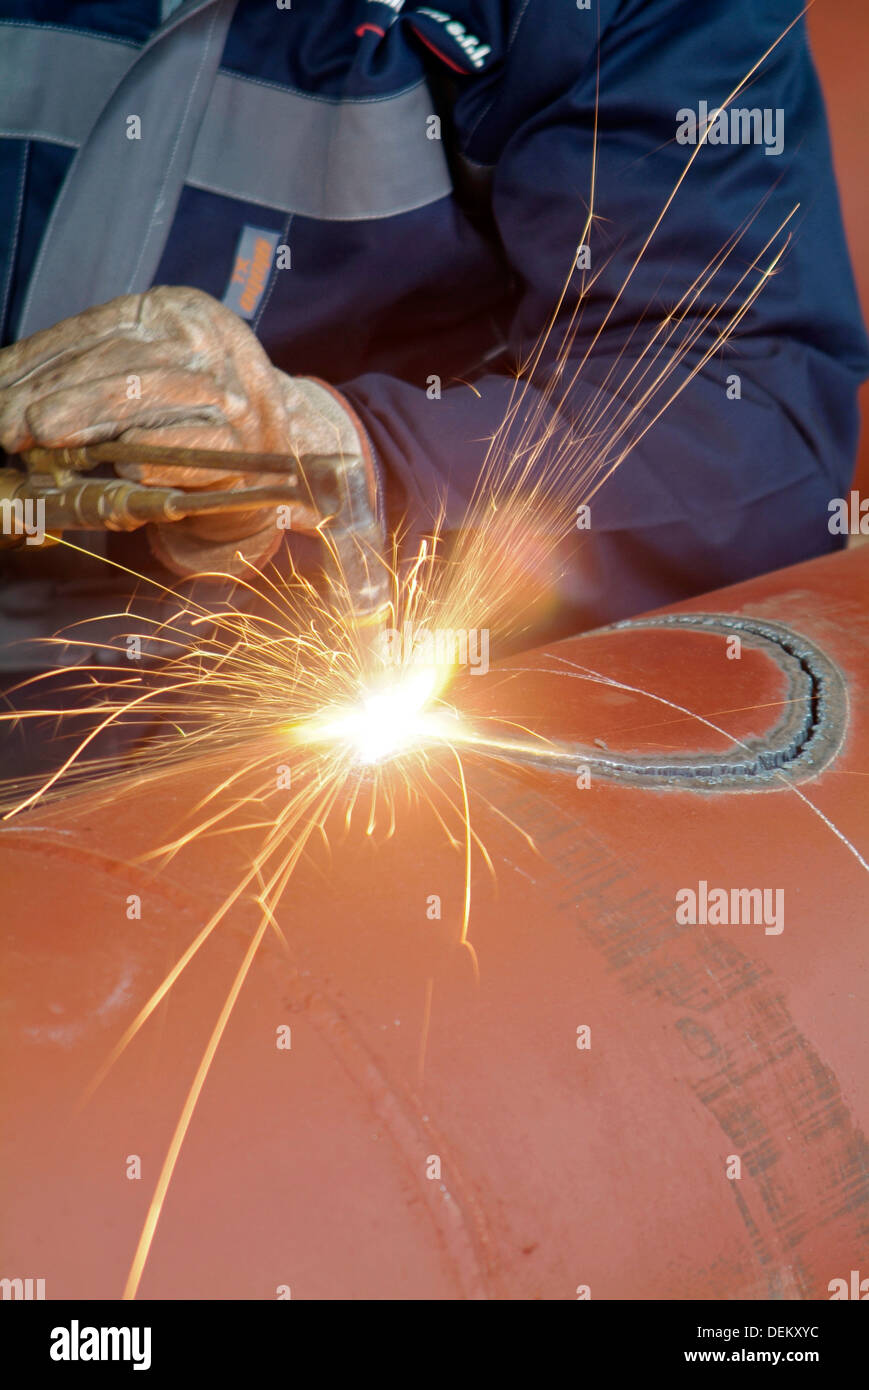 man at work welding action Stock Photo